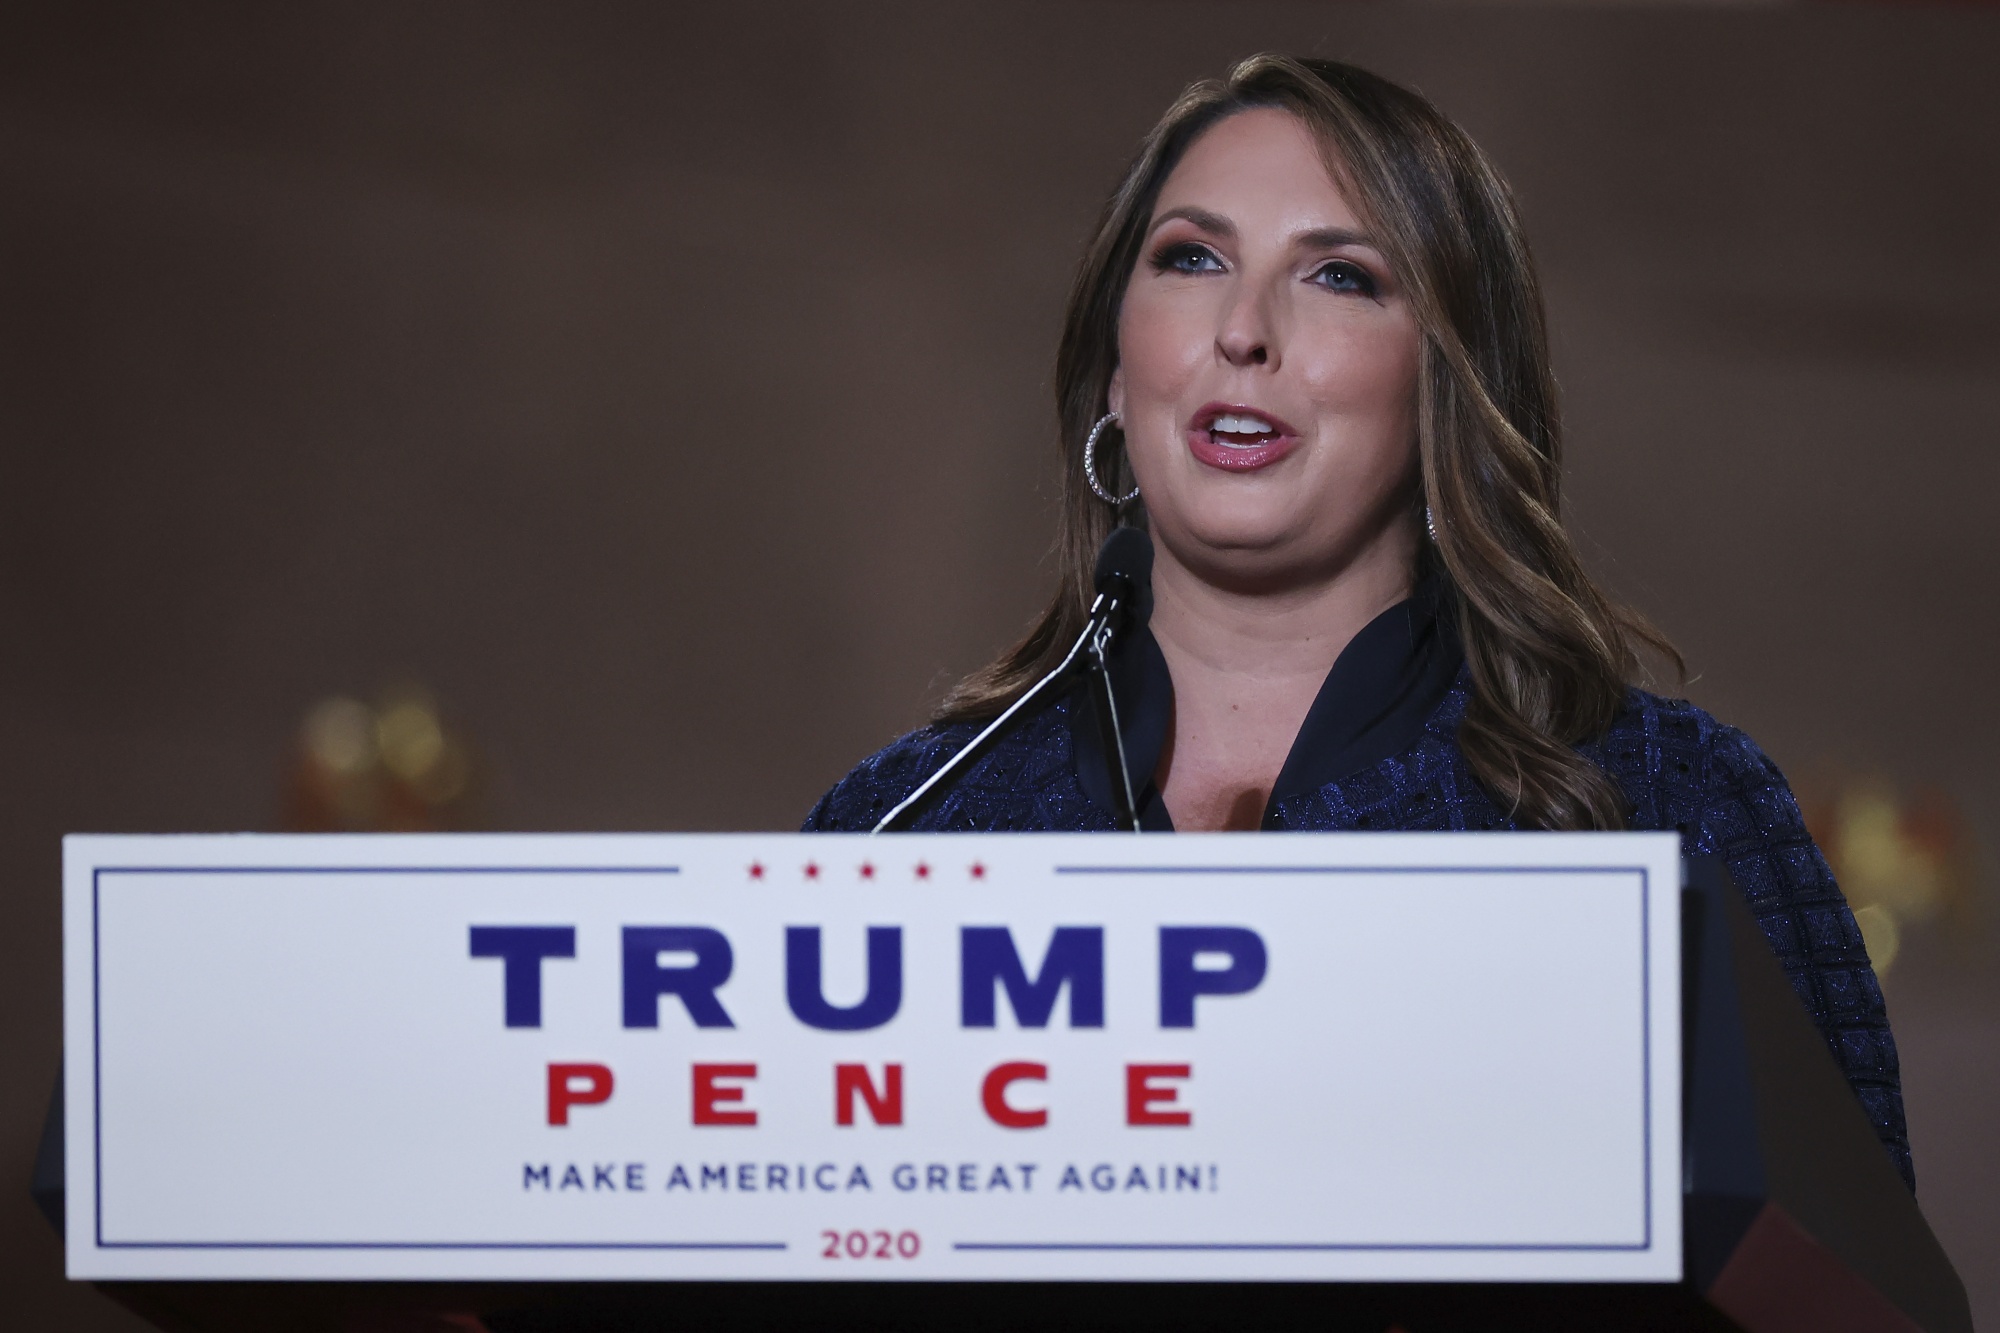 Ronna McDaniel ReElected RNC Chairwoman Without Opposition Bloomberg